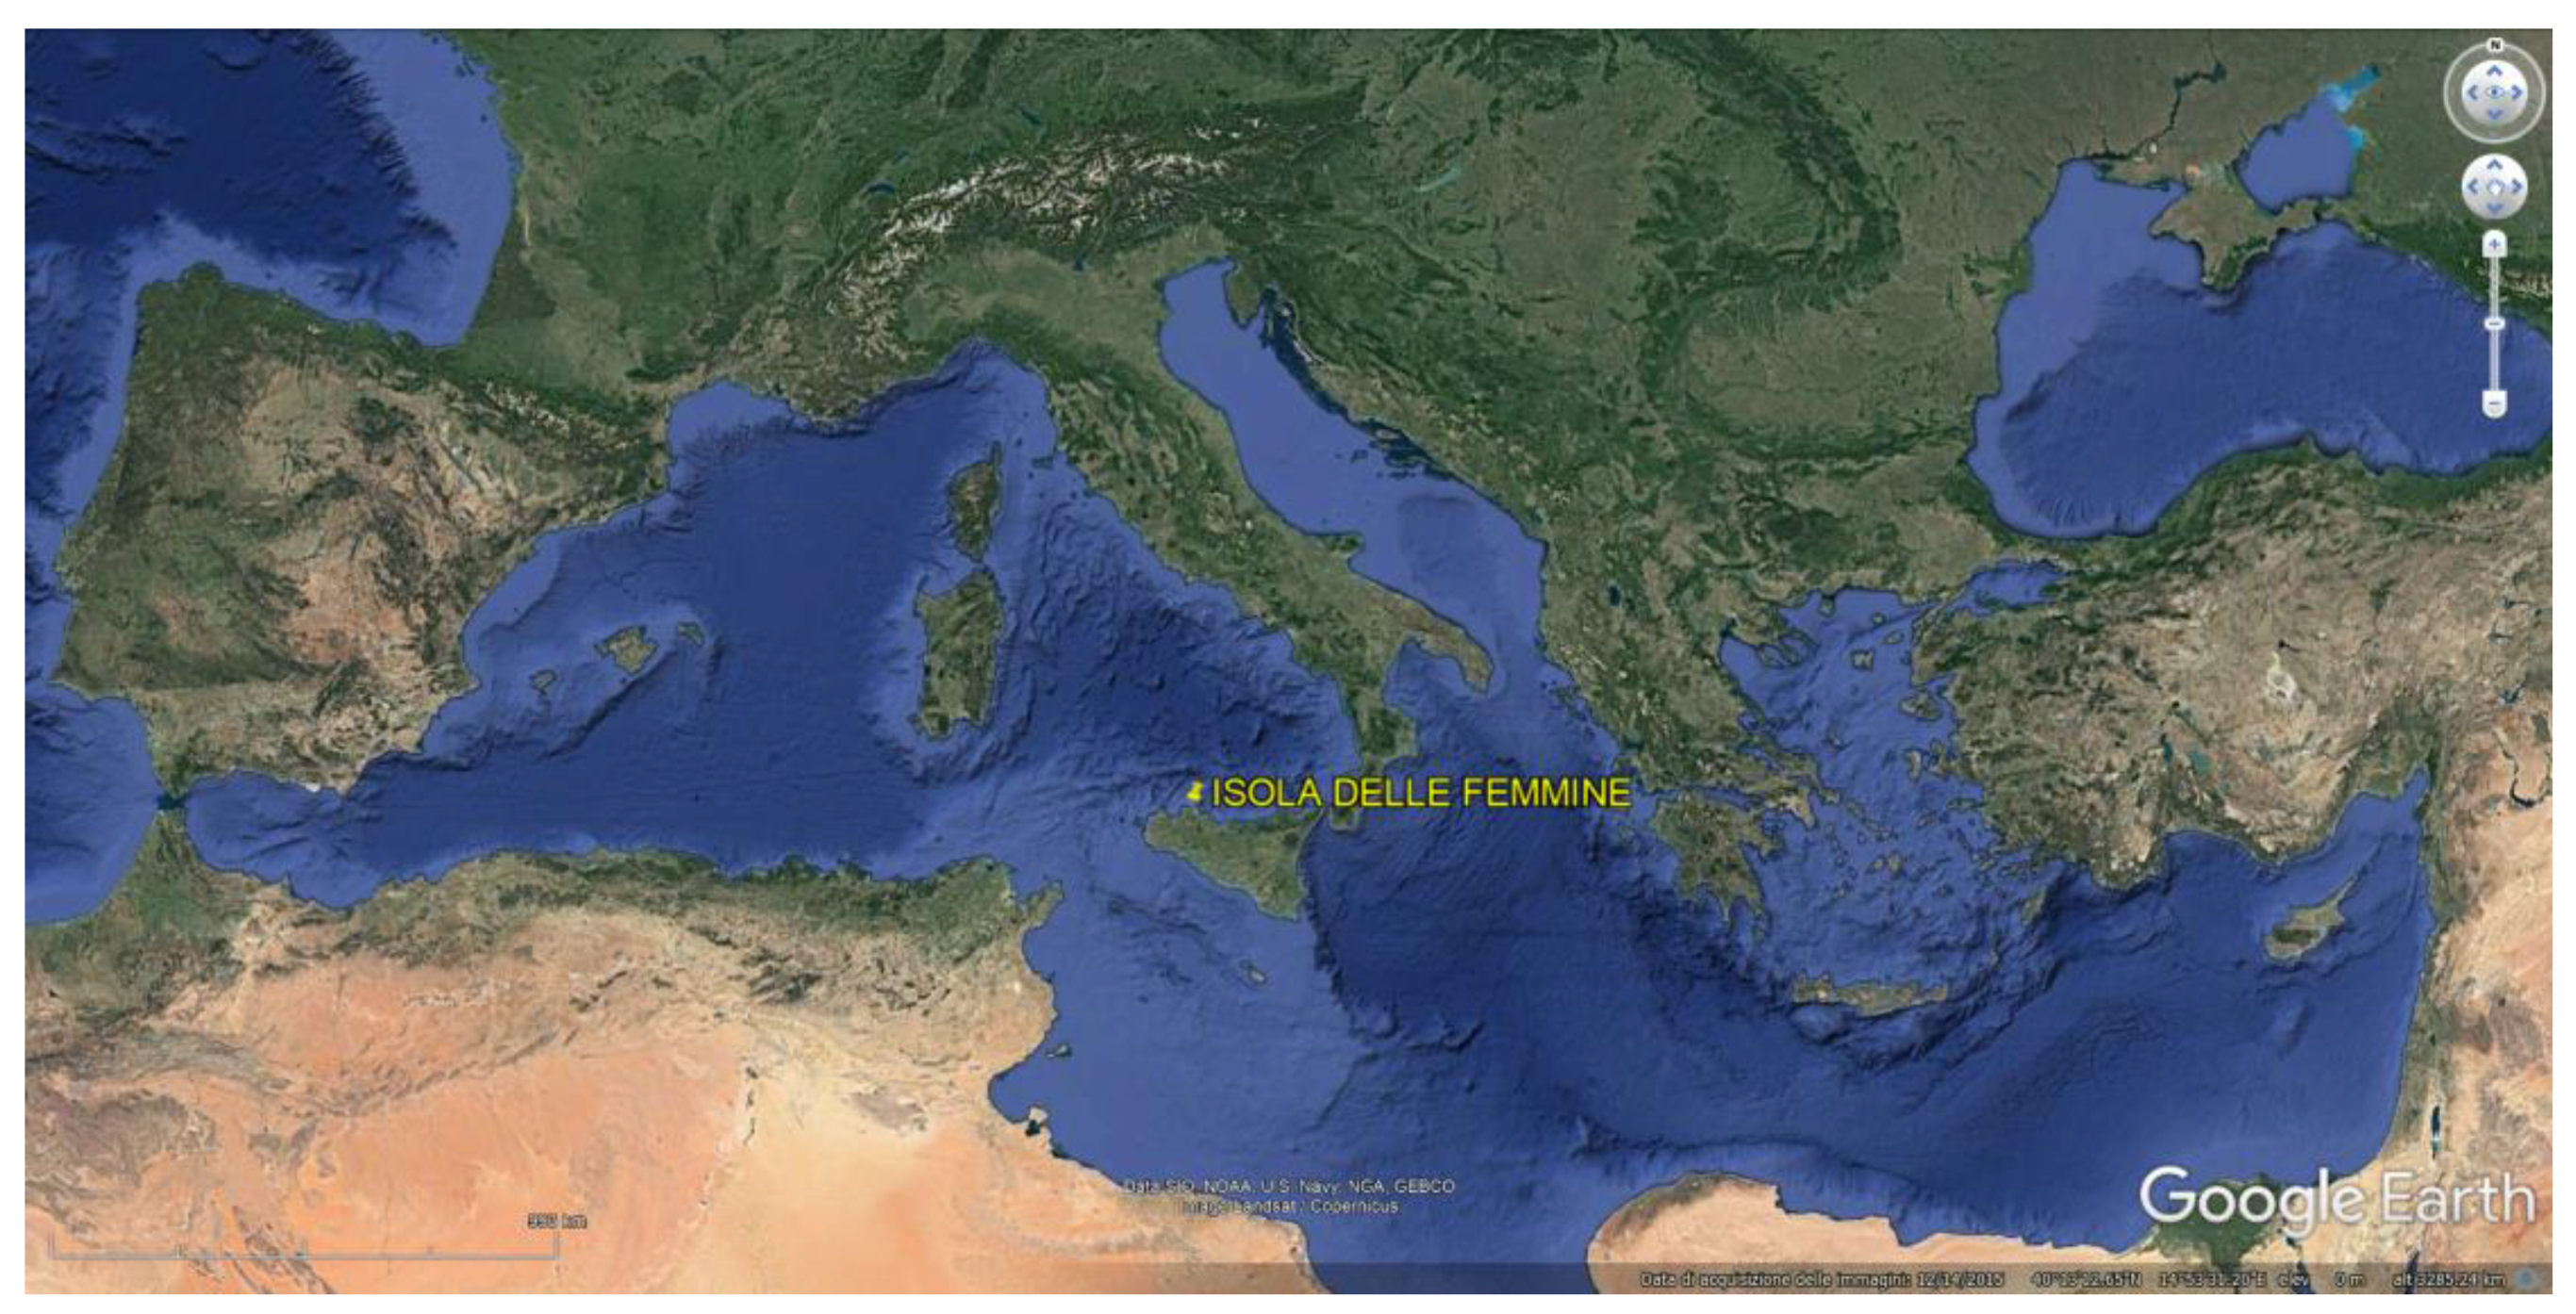 Heritage | Free Full-Text | The WAS Project&mdash;Waterscape Archaeology in  Sicily at Isola delle Femmine (PA, Italy): Submerged and Emerged Heritage